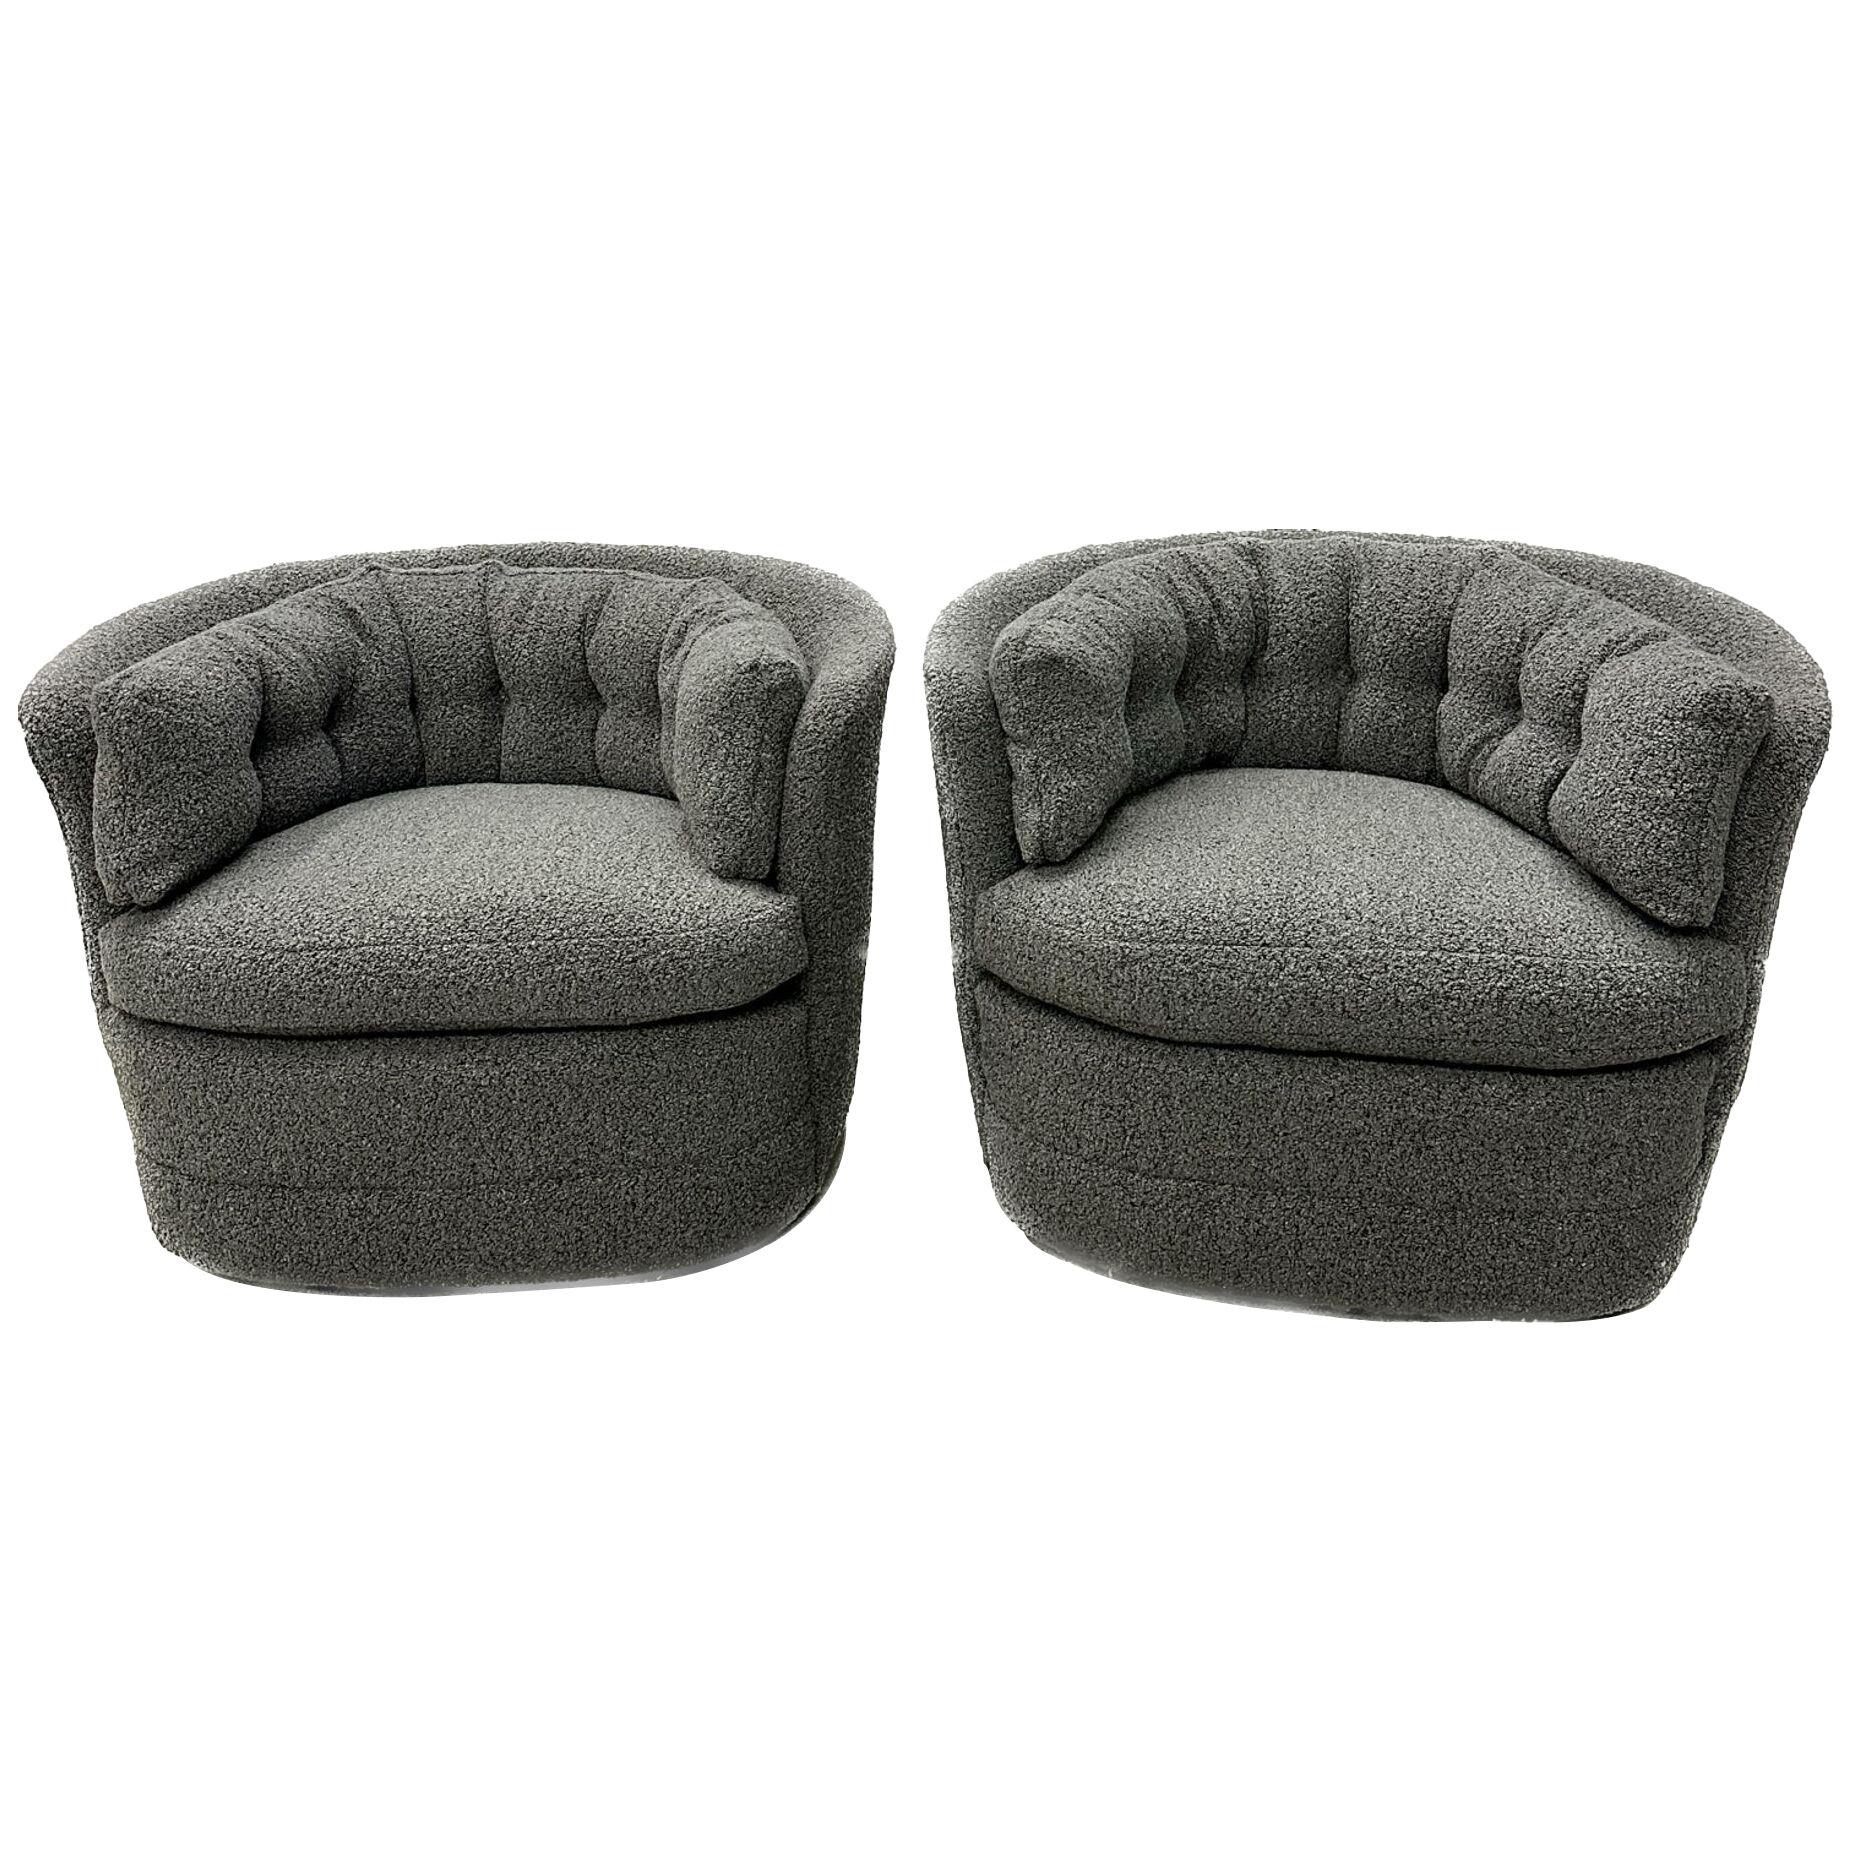 Mid-Century Modern Style Swivel, Rolling Lounge Chairs, Baughman Style, Boucle